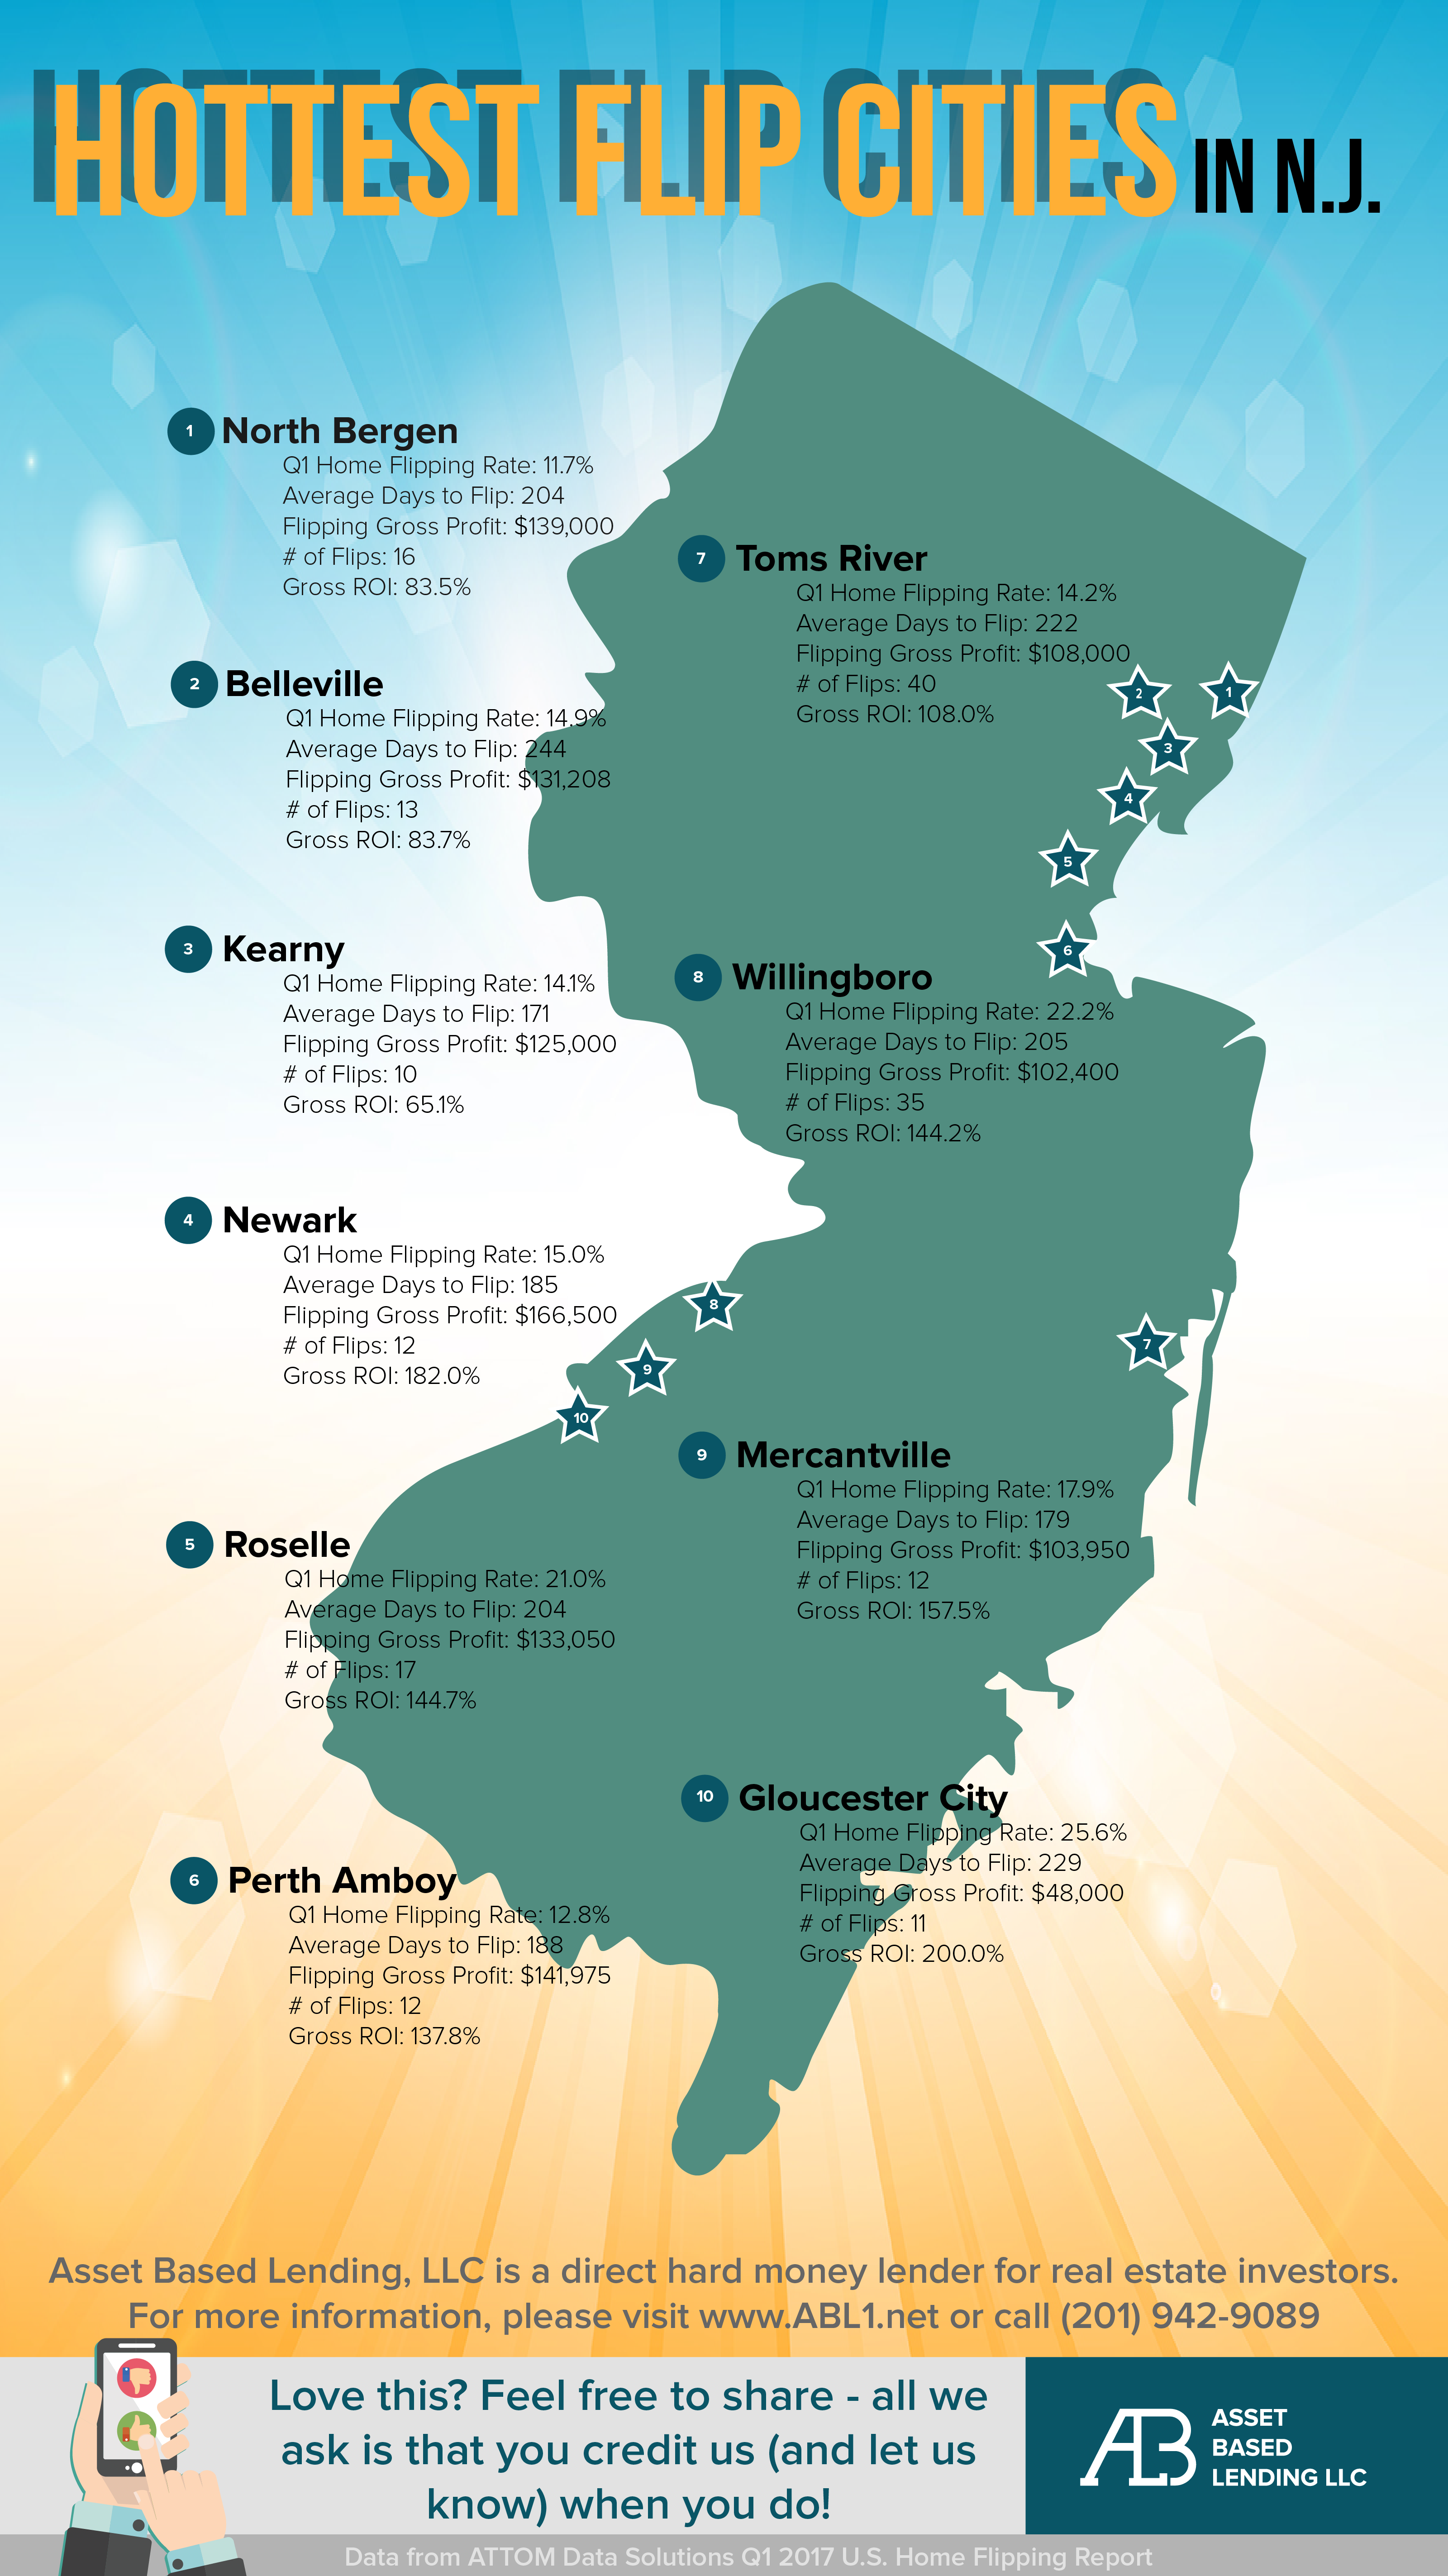 List of: Cities and Towns in New Jersey